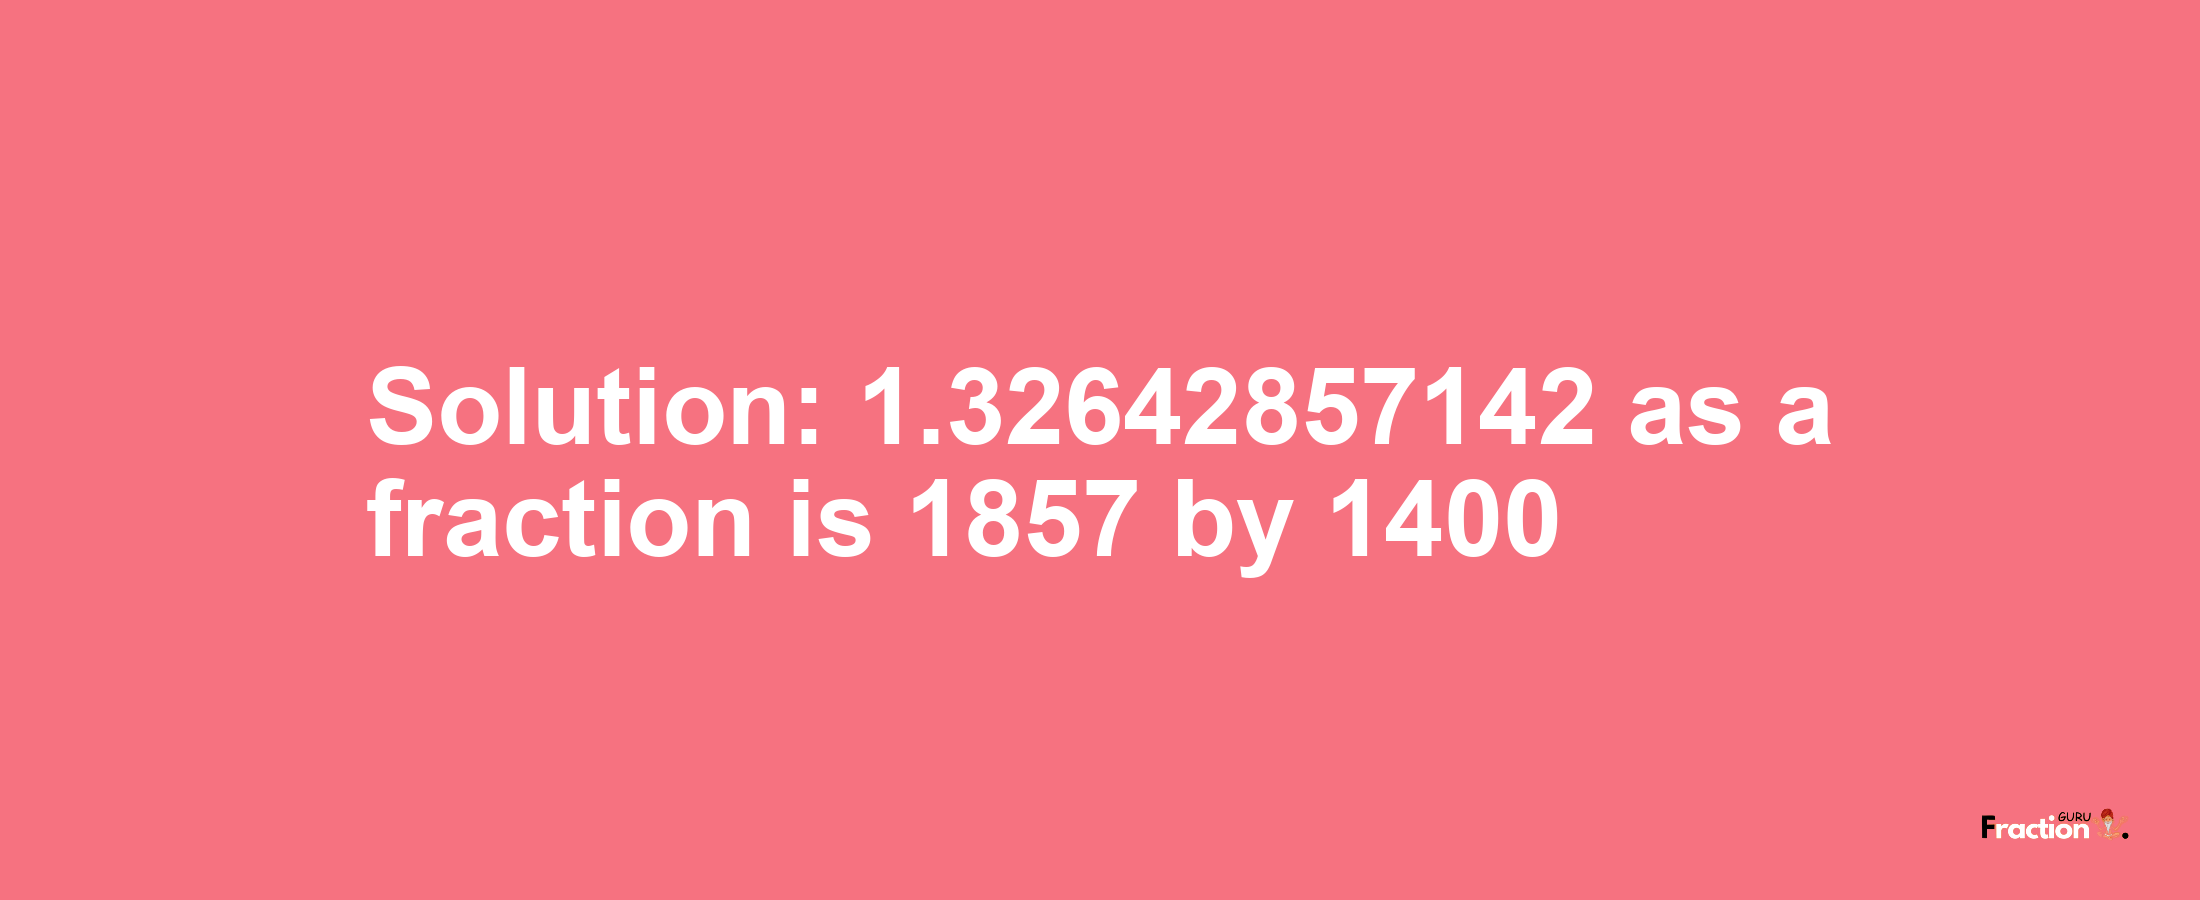 Solution:1.32642857142 as a fraction is 1857/1400